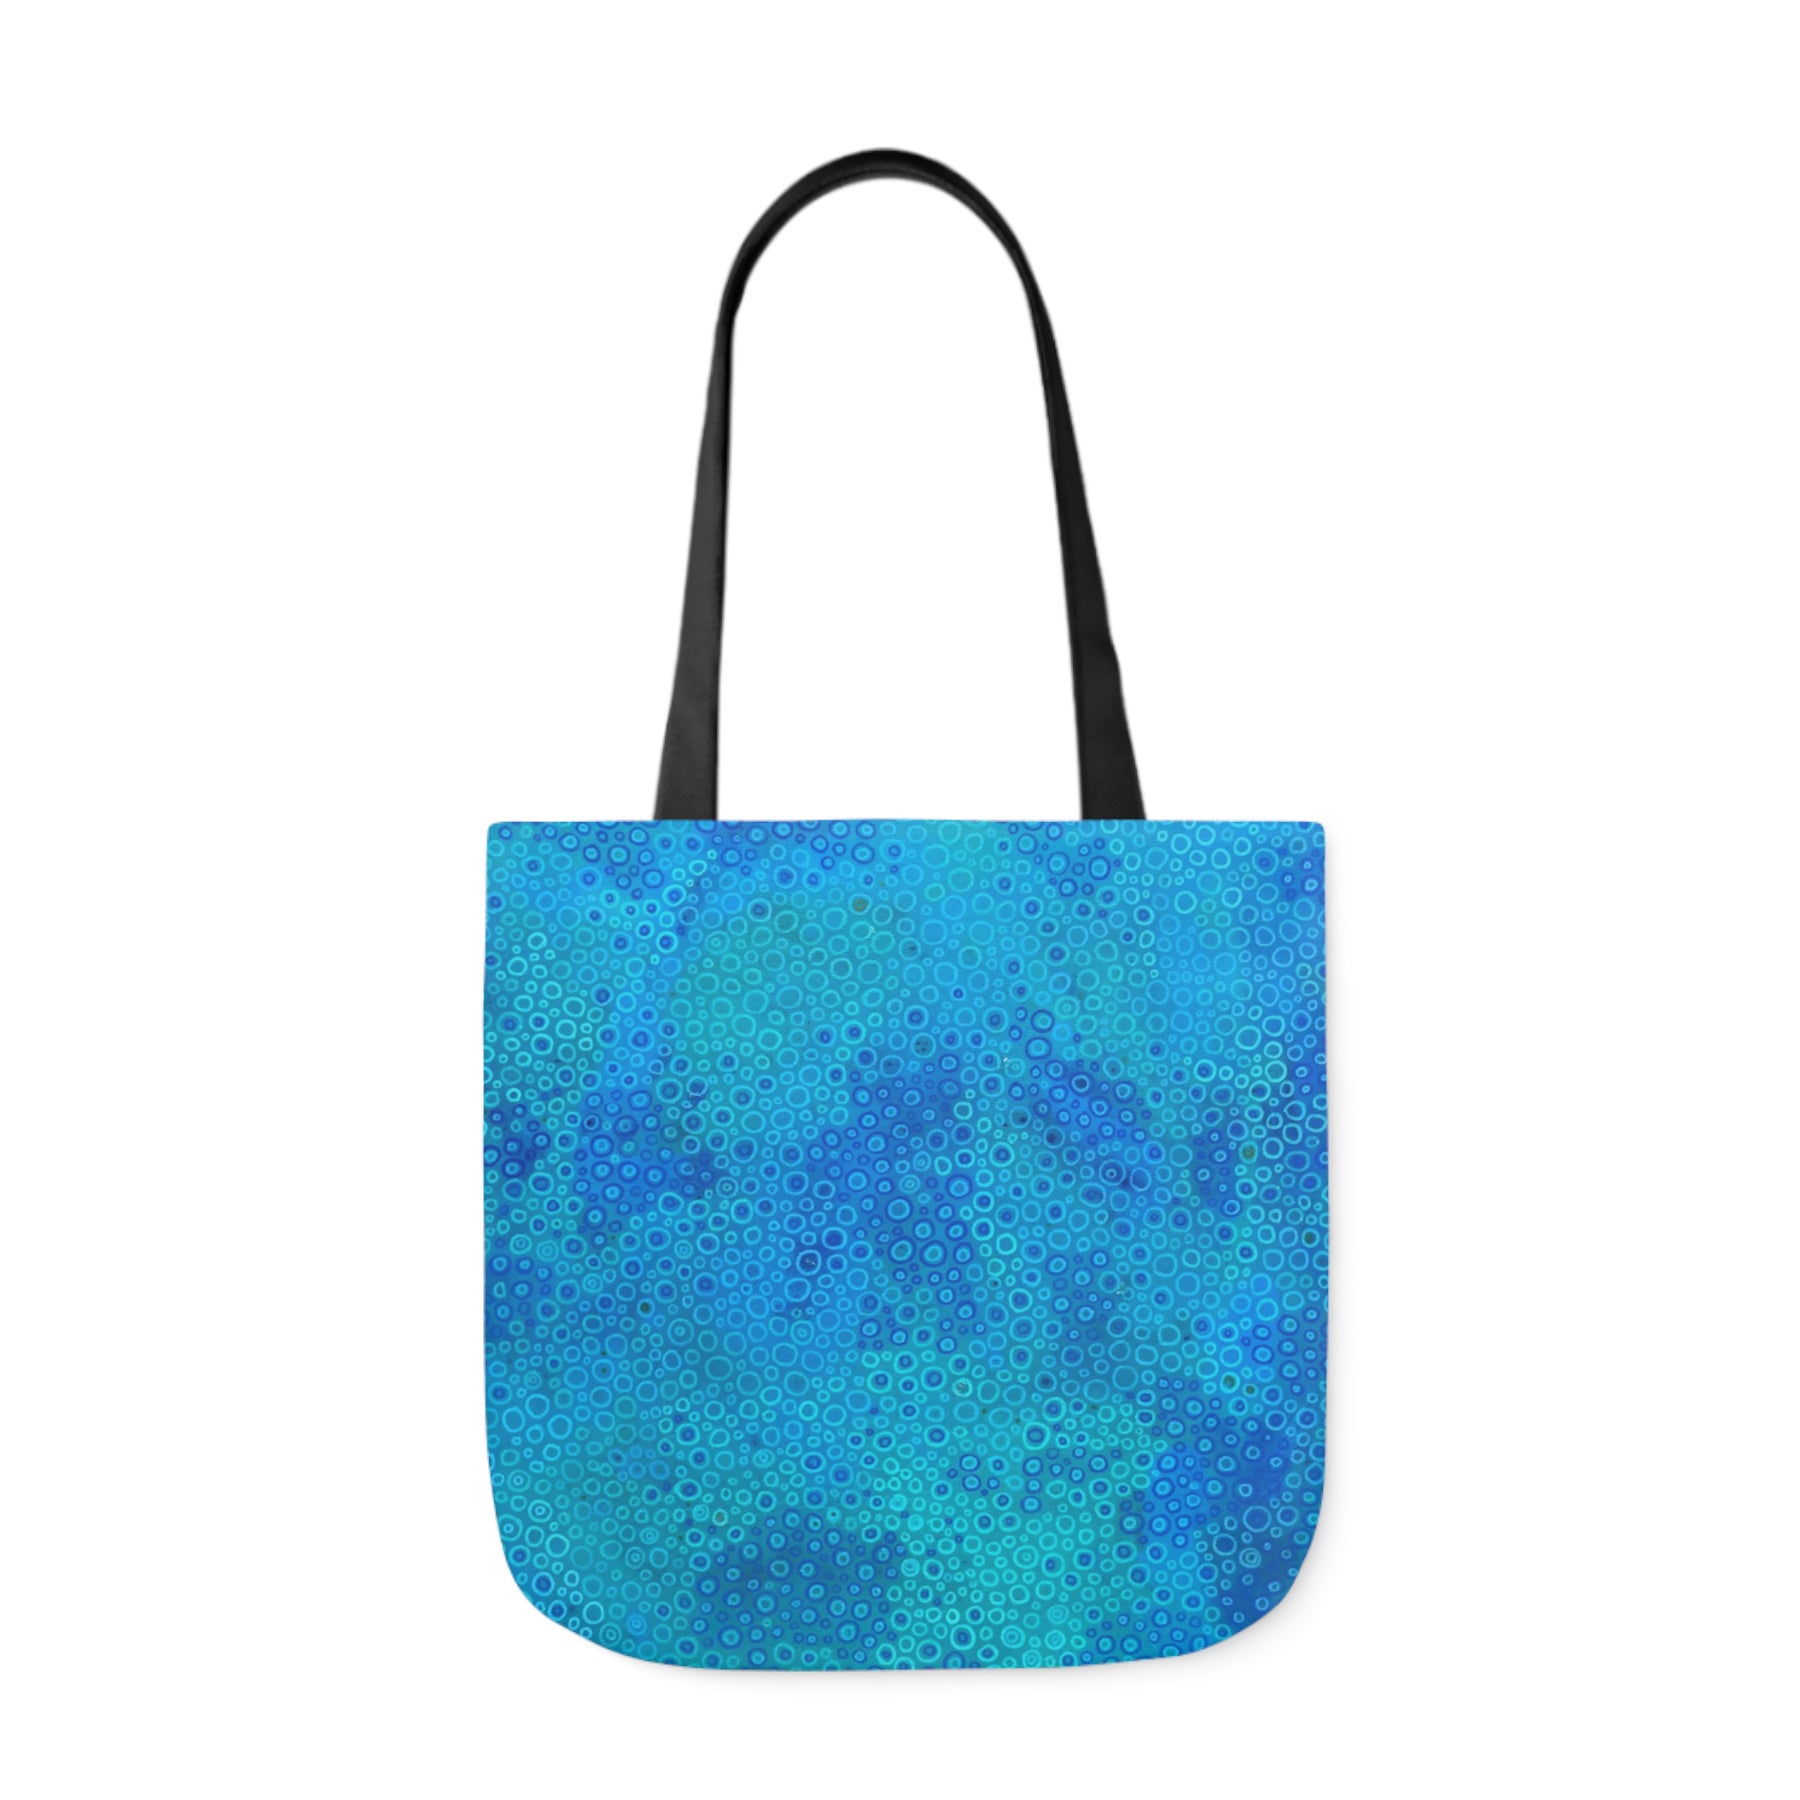 blue tote bag with abstract painting design in shades of blue, draws inspiration from the shapes in the ocean, coral, and water bubbles